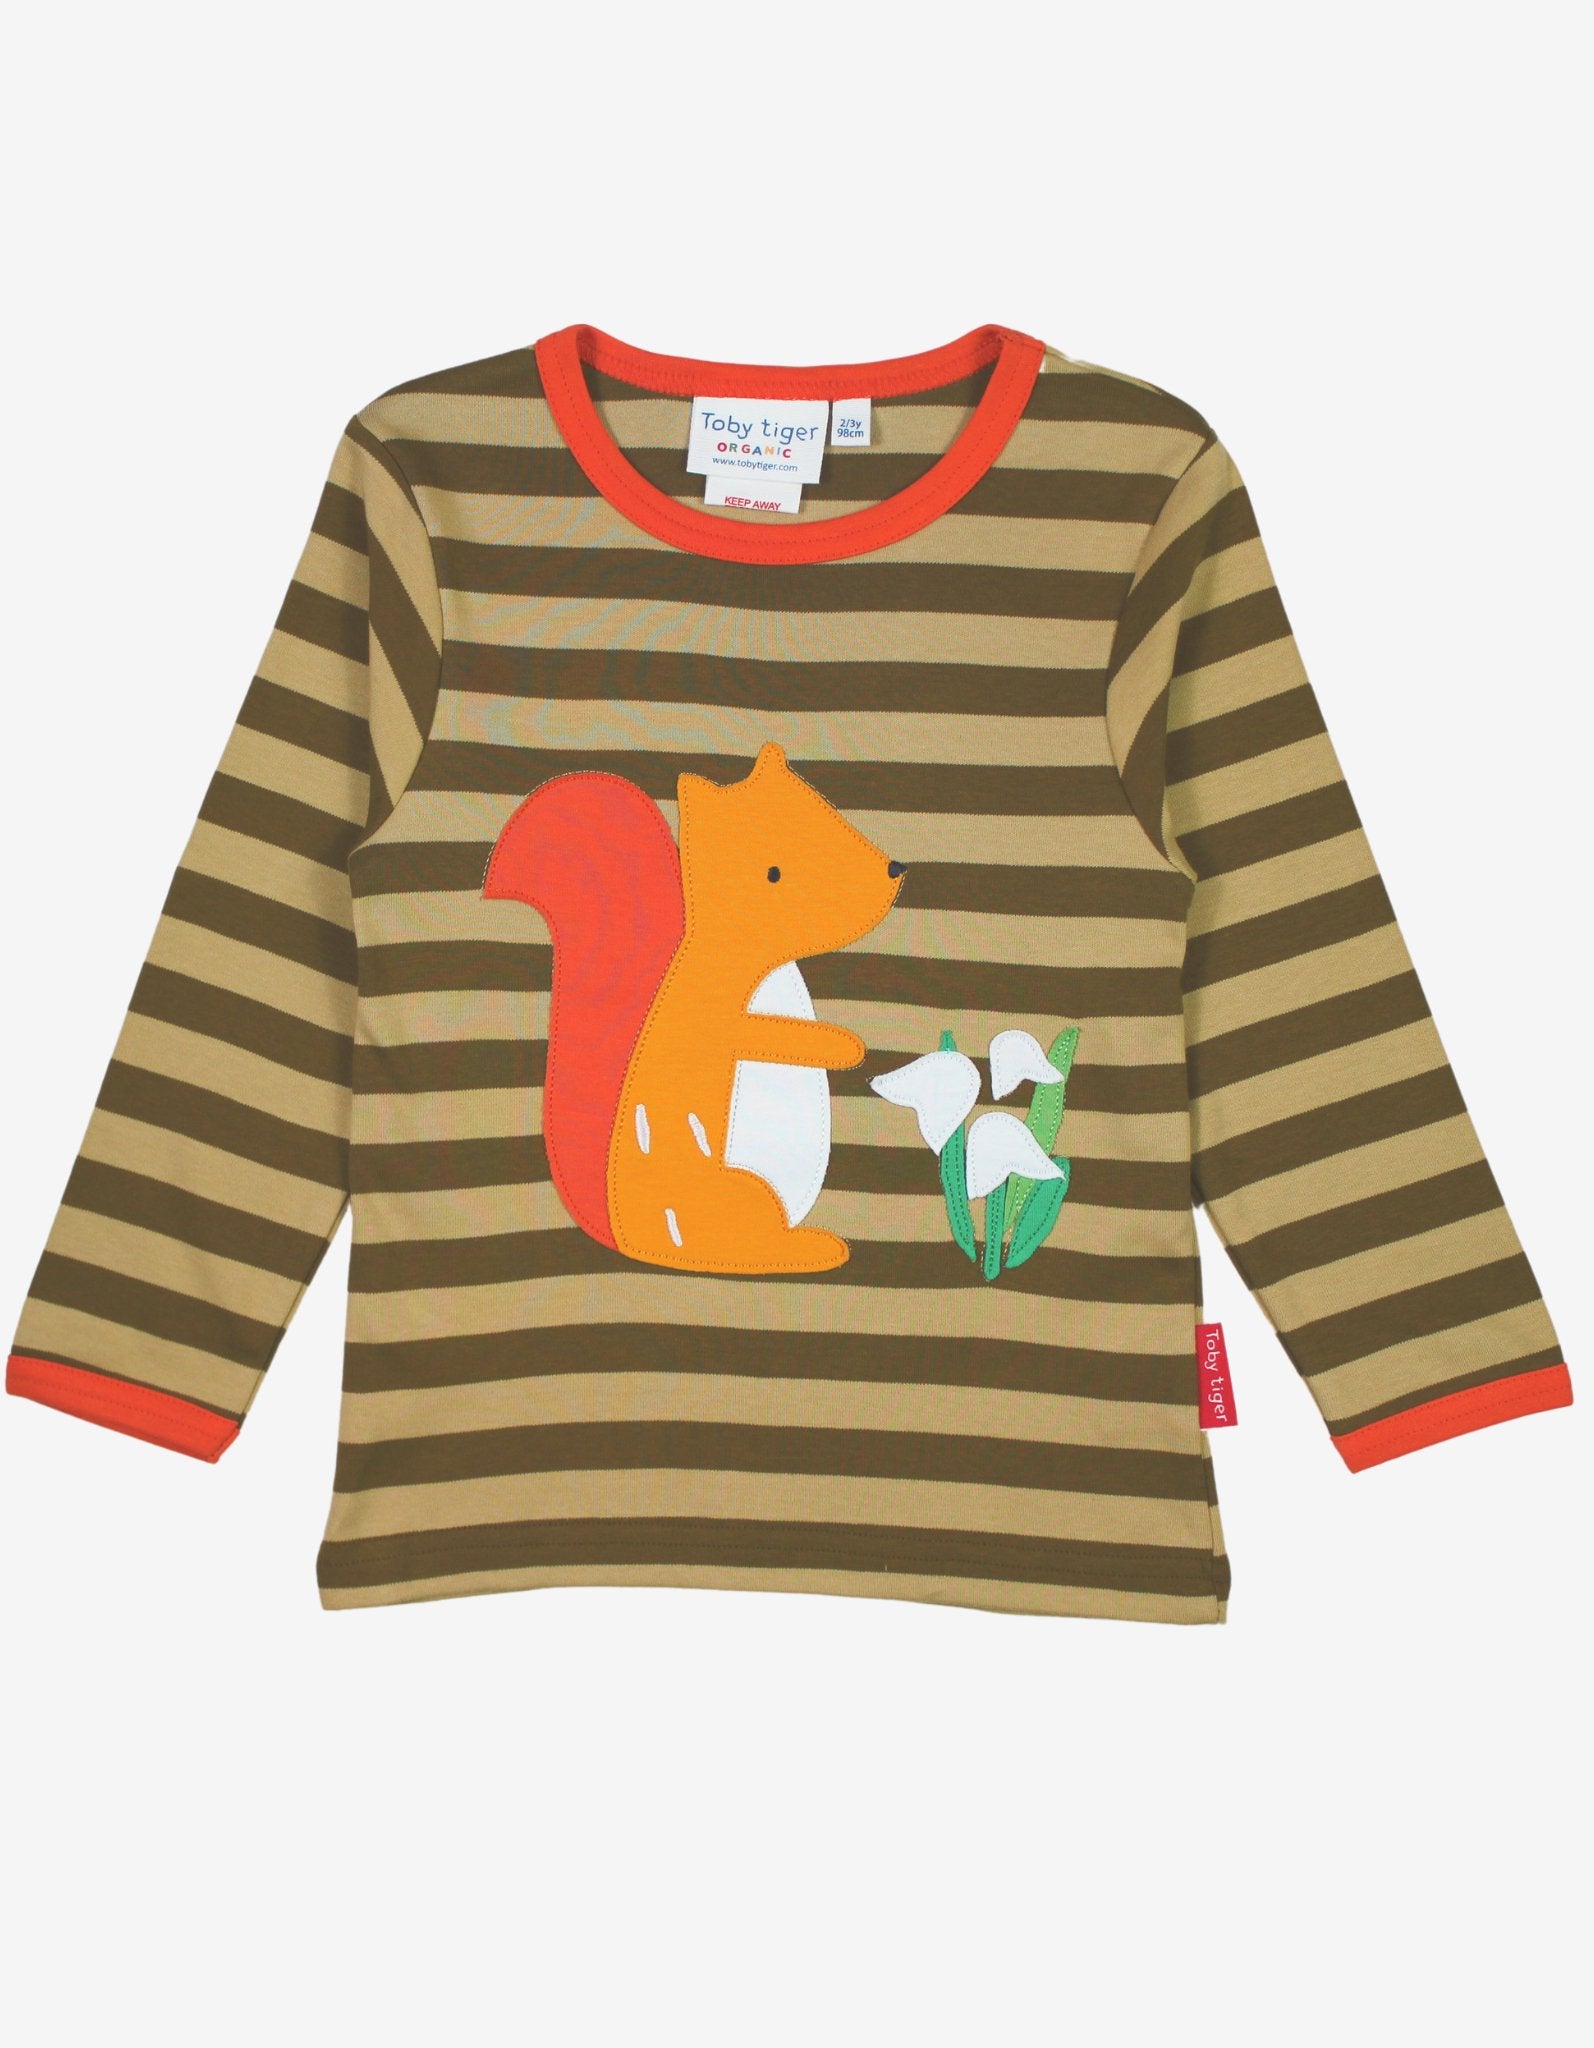 Organic Squirrel Applique Long-Sleeved T-Shirt - Toby Tiger